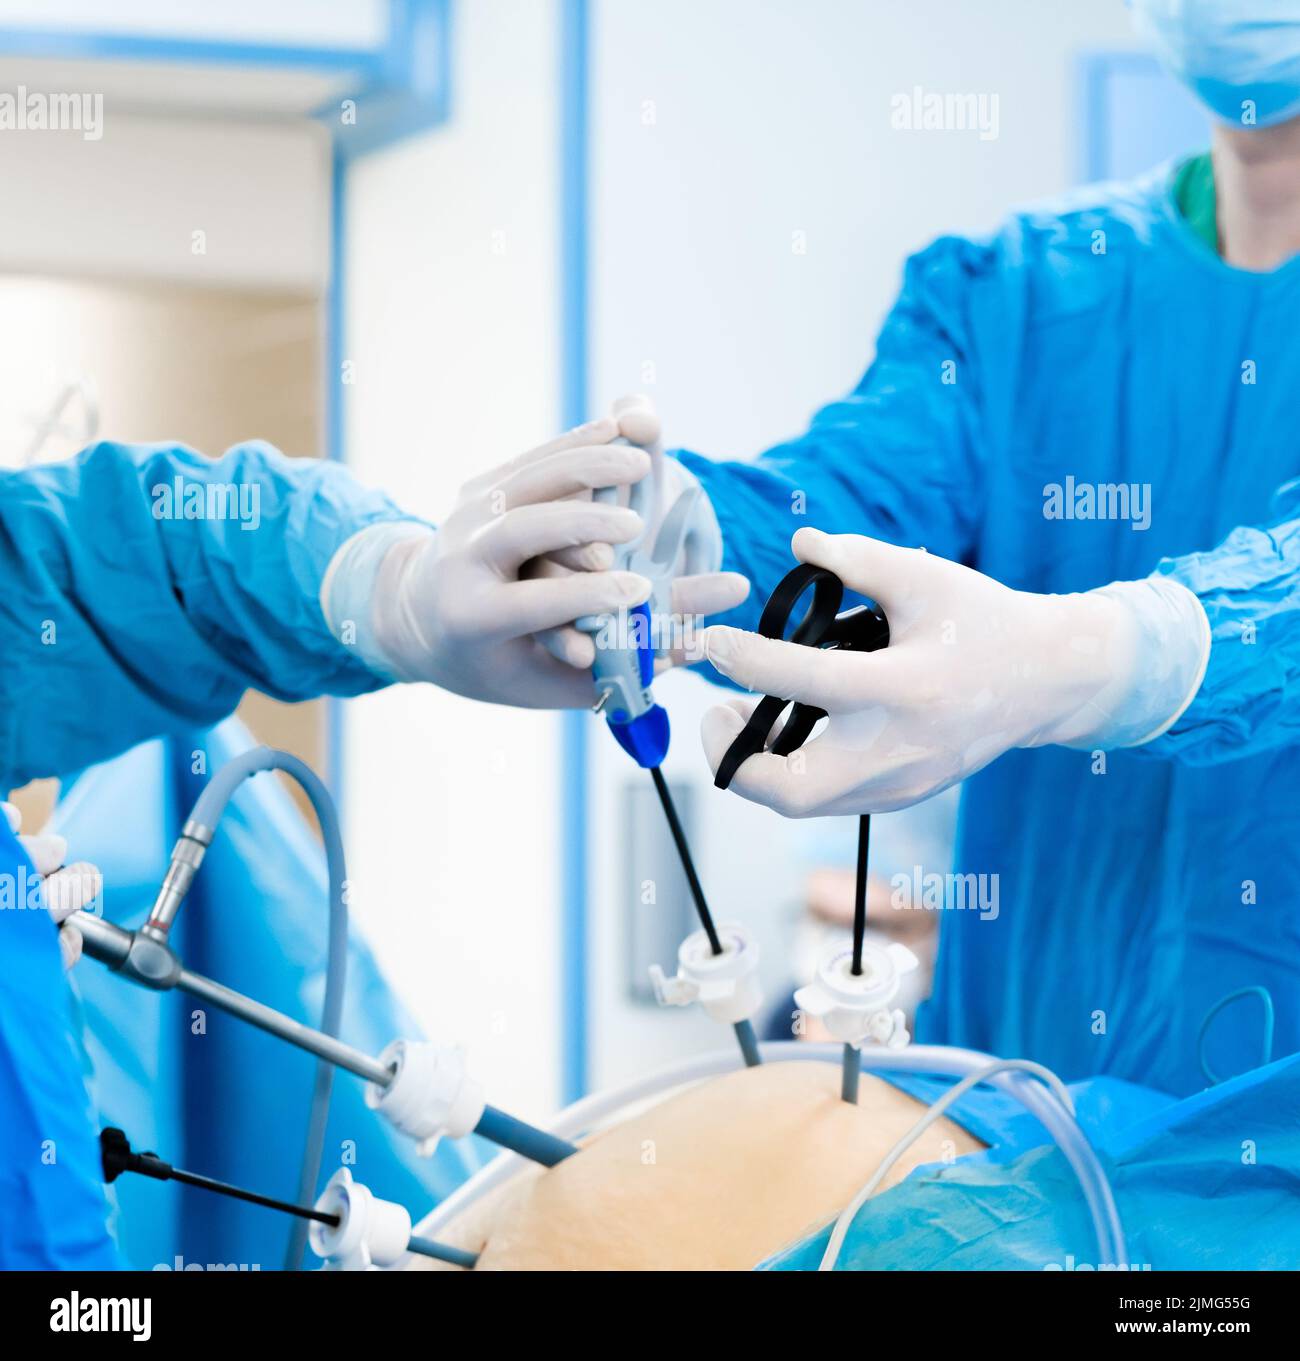 Hands of surgeons with surgical equipment. Stock Photo